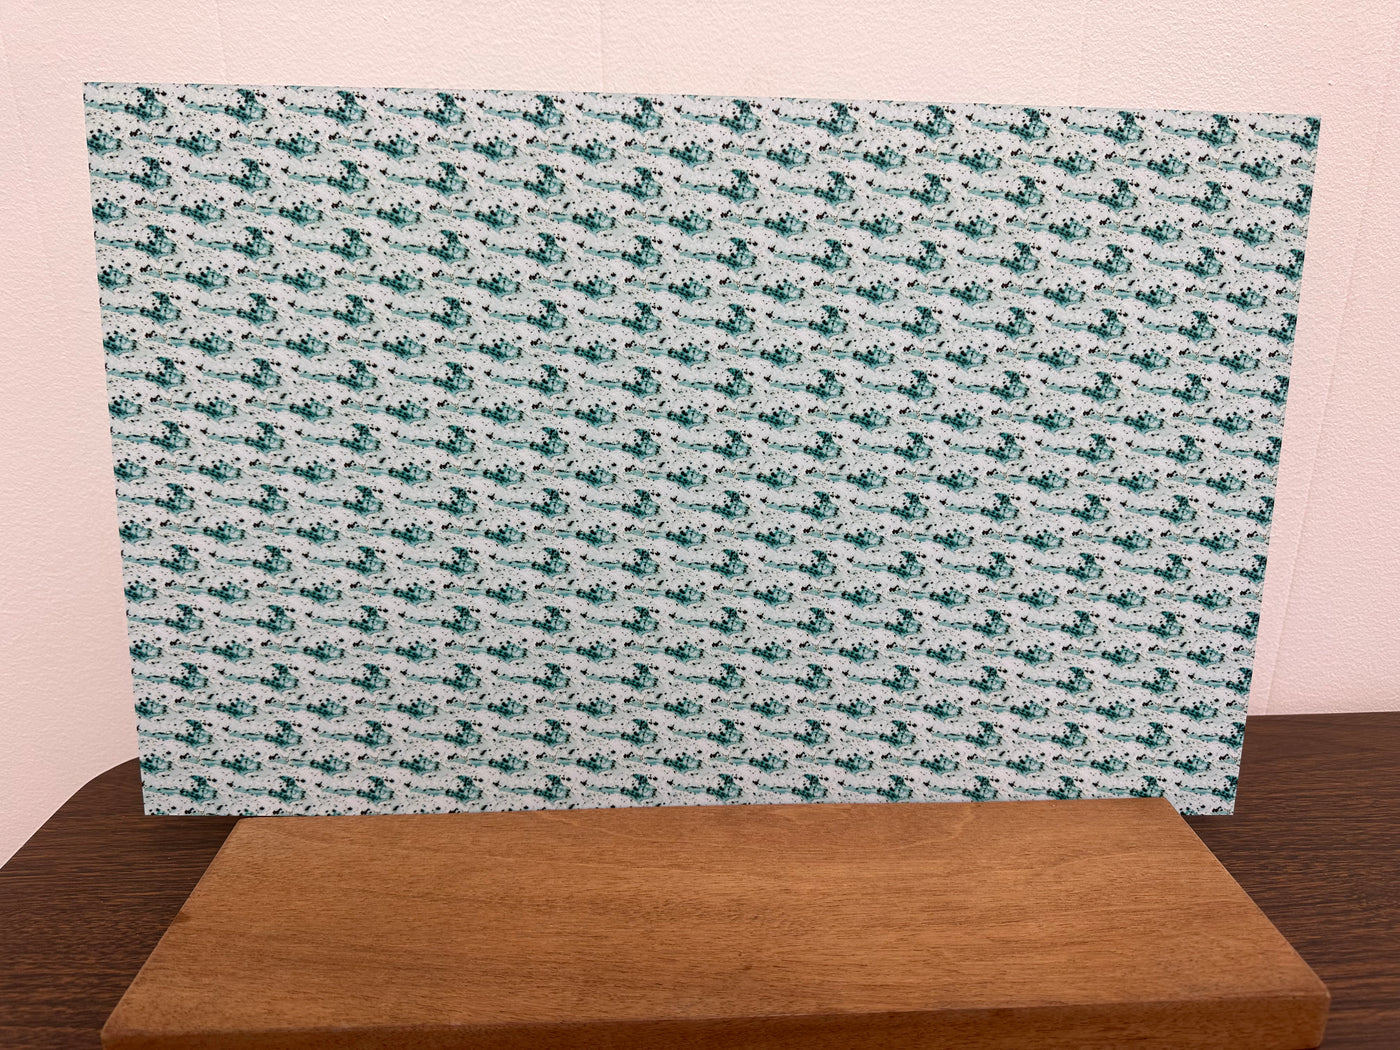 PatternPly® Micro Speckled Teal Stone